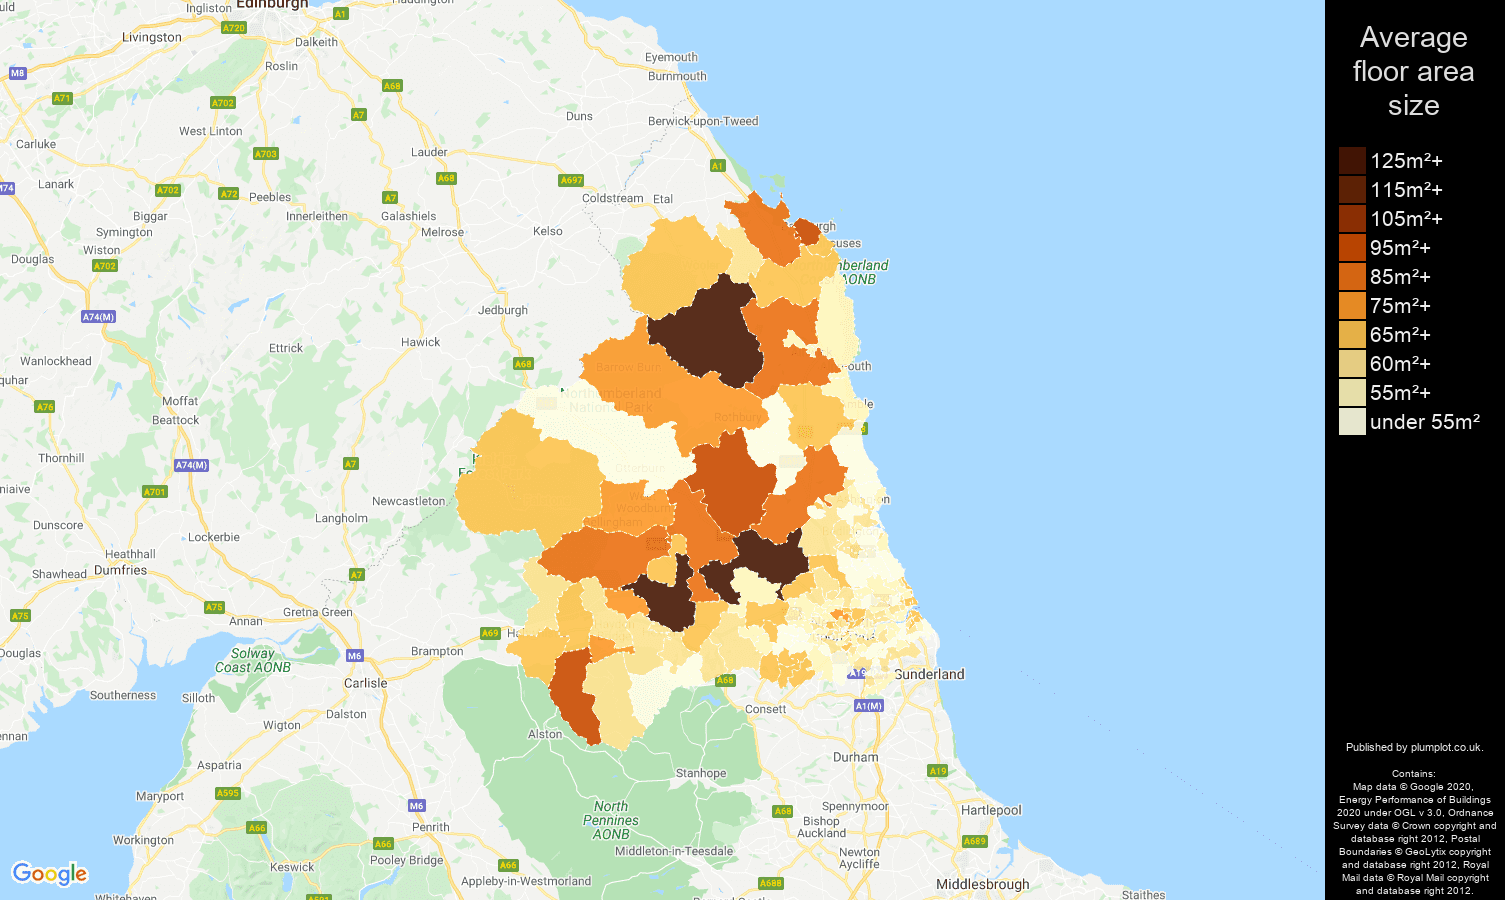 Newcastle upon Tyne map of average floor area size of flats